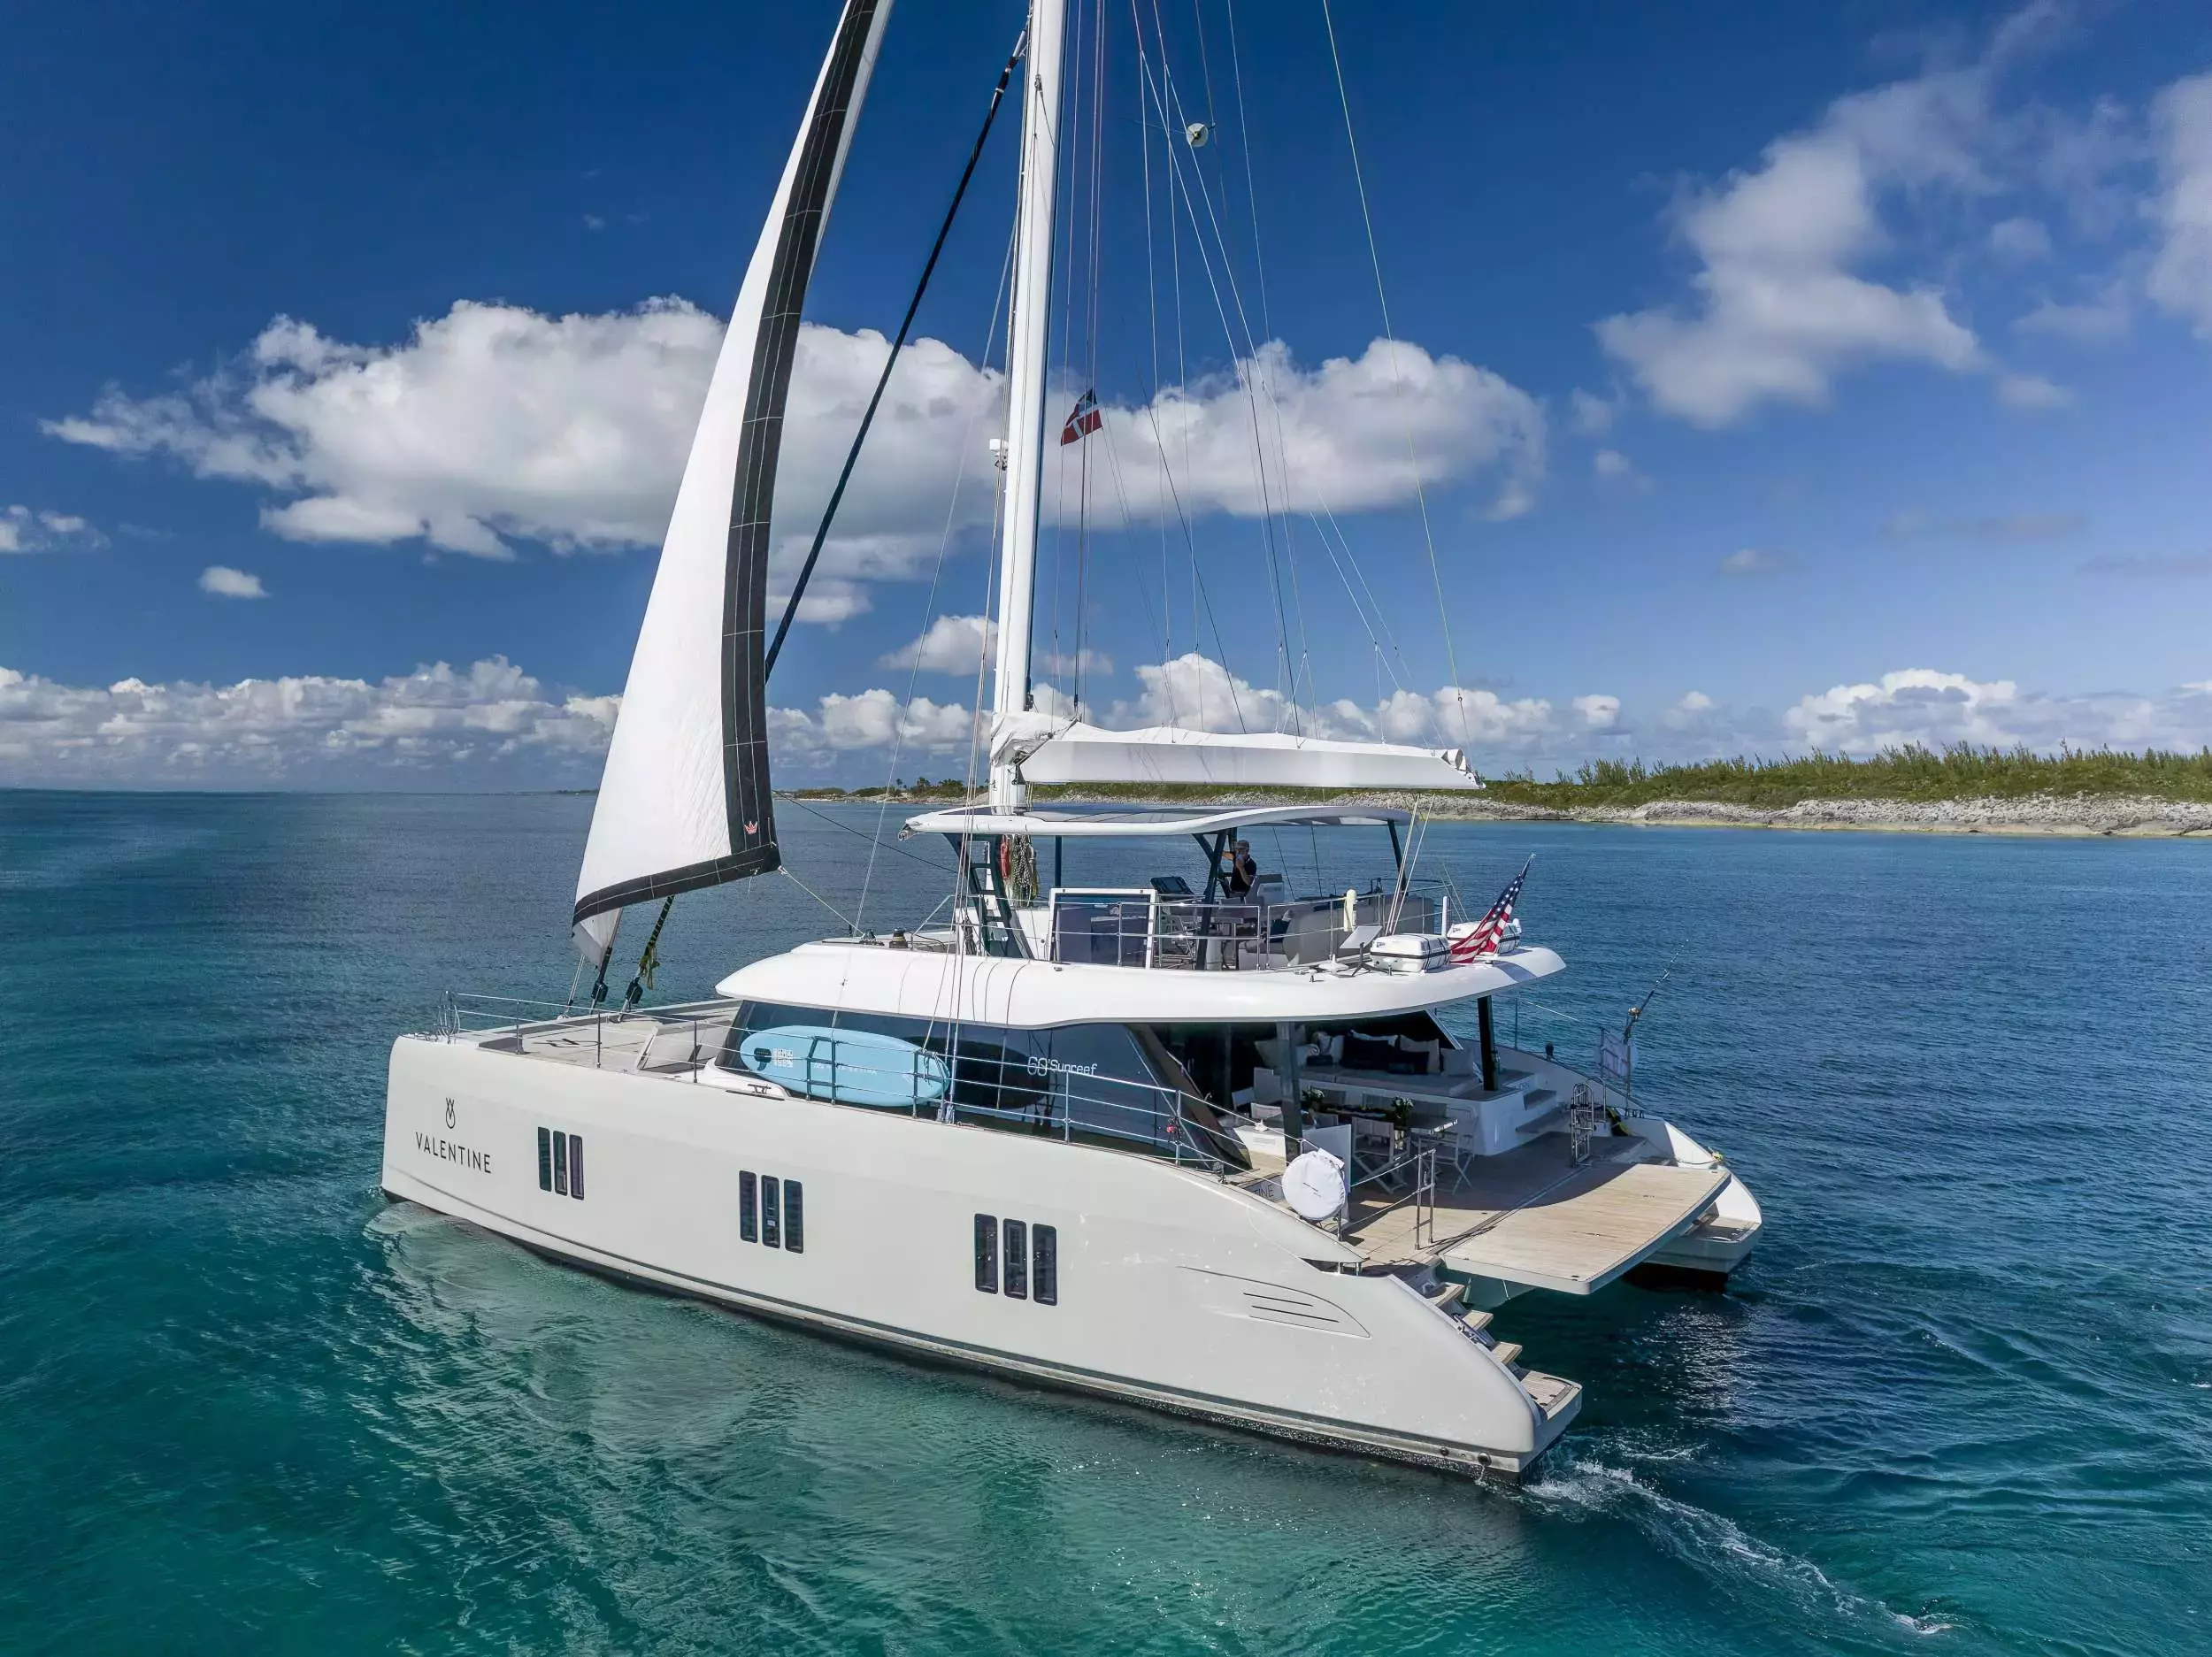 Valentine by Sunreef Yachts - Top rates for a Rental of a private Power Catamaran in US Virgin Islands